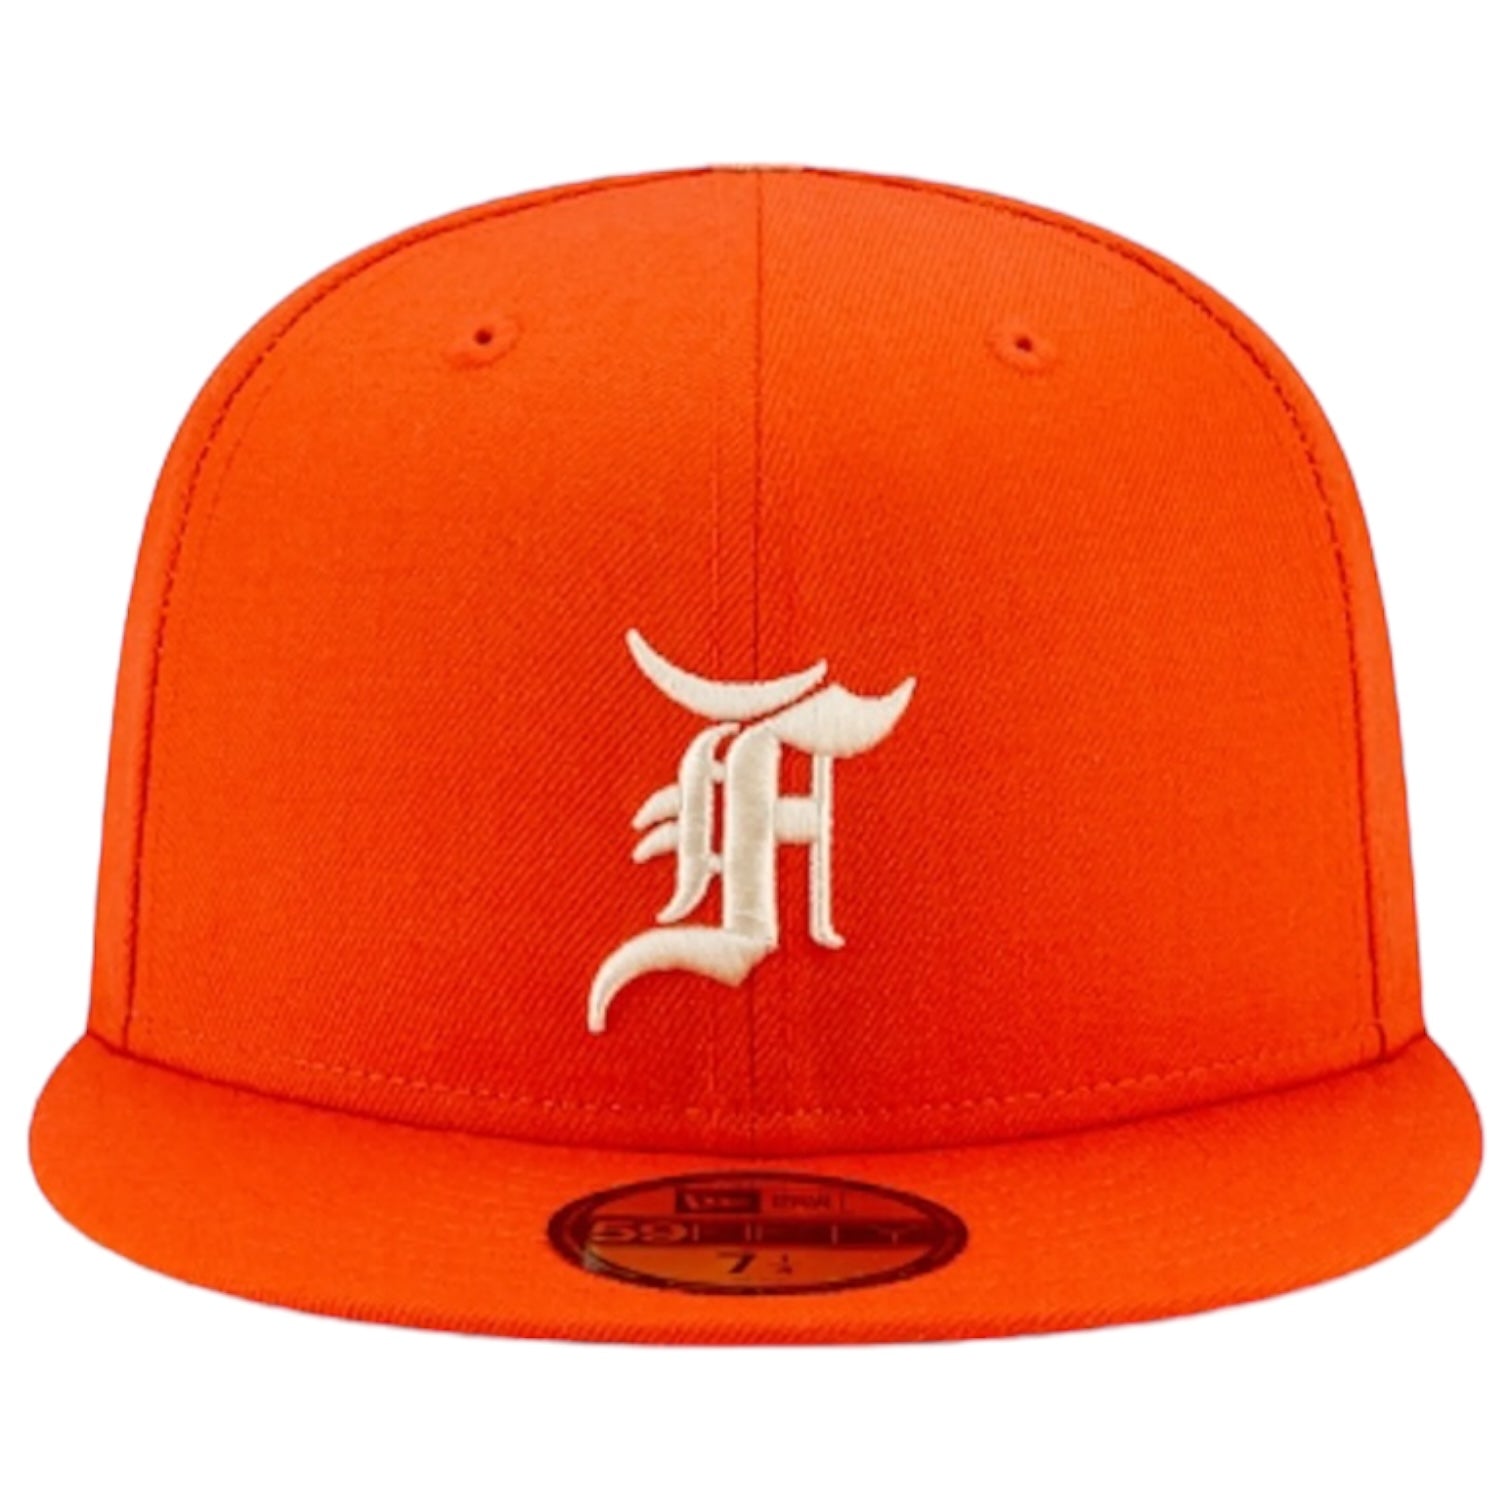 Fear of God Essentials x New Era Fitted Hat Orange - Fear of God Hat